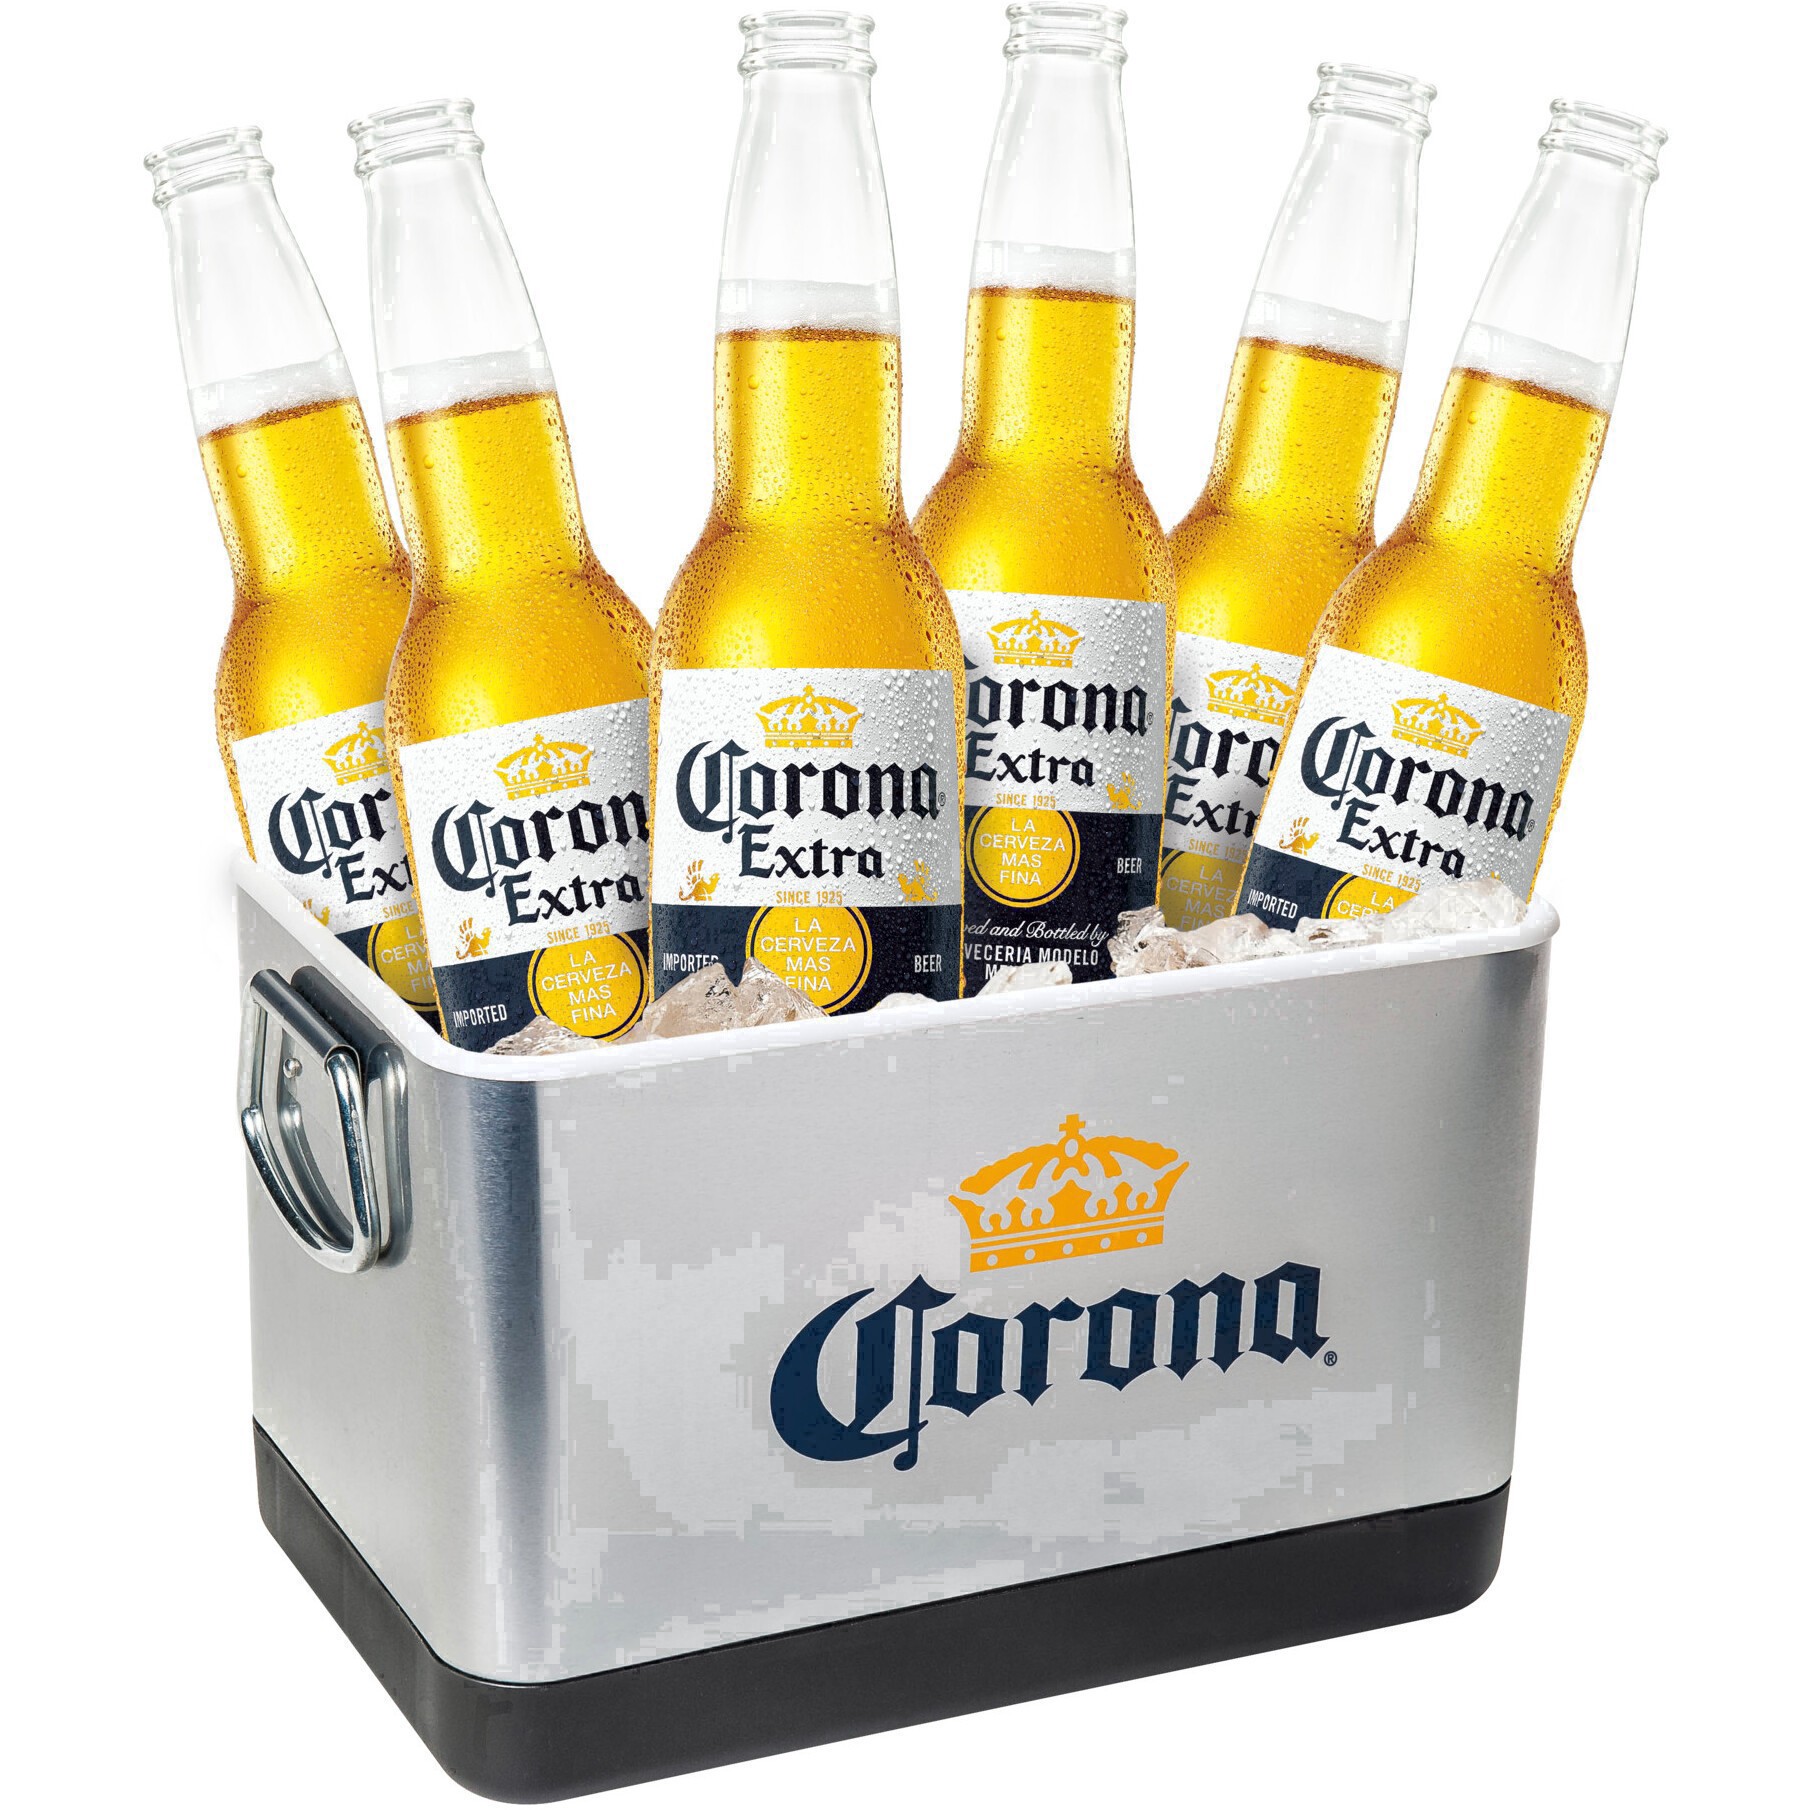 slide 24 of 98, Corona Extra Lager Mexican Beer Bottles, 12 oz